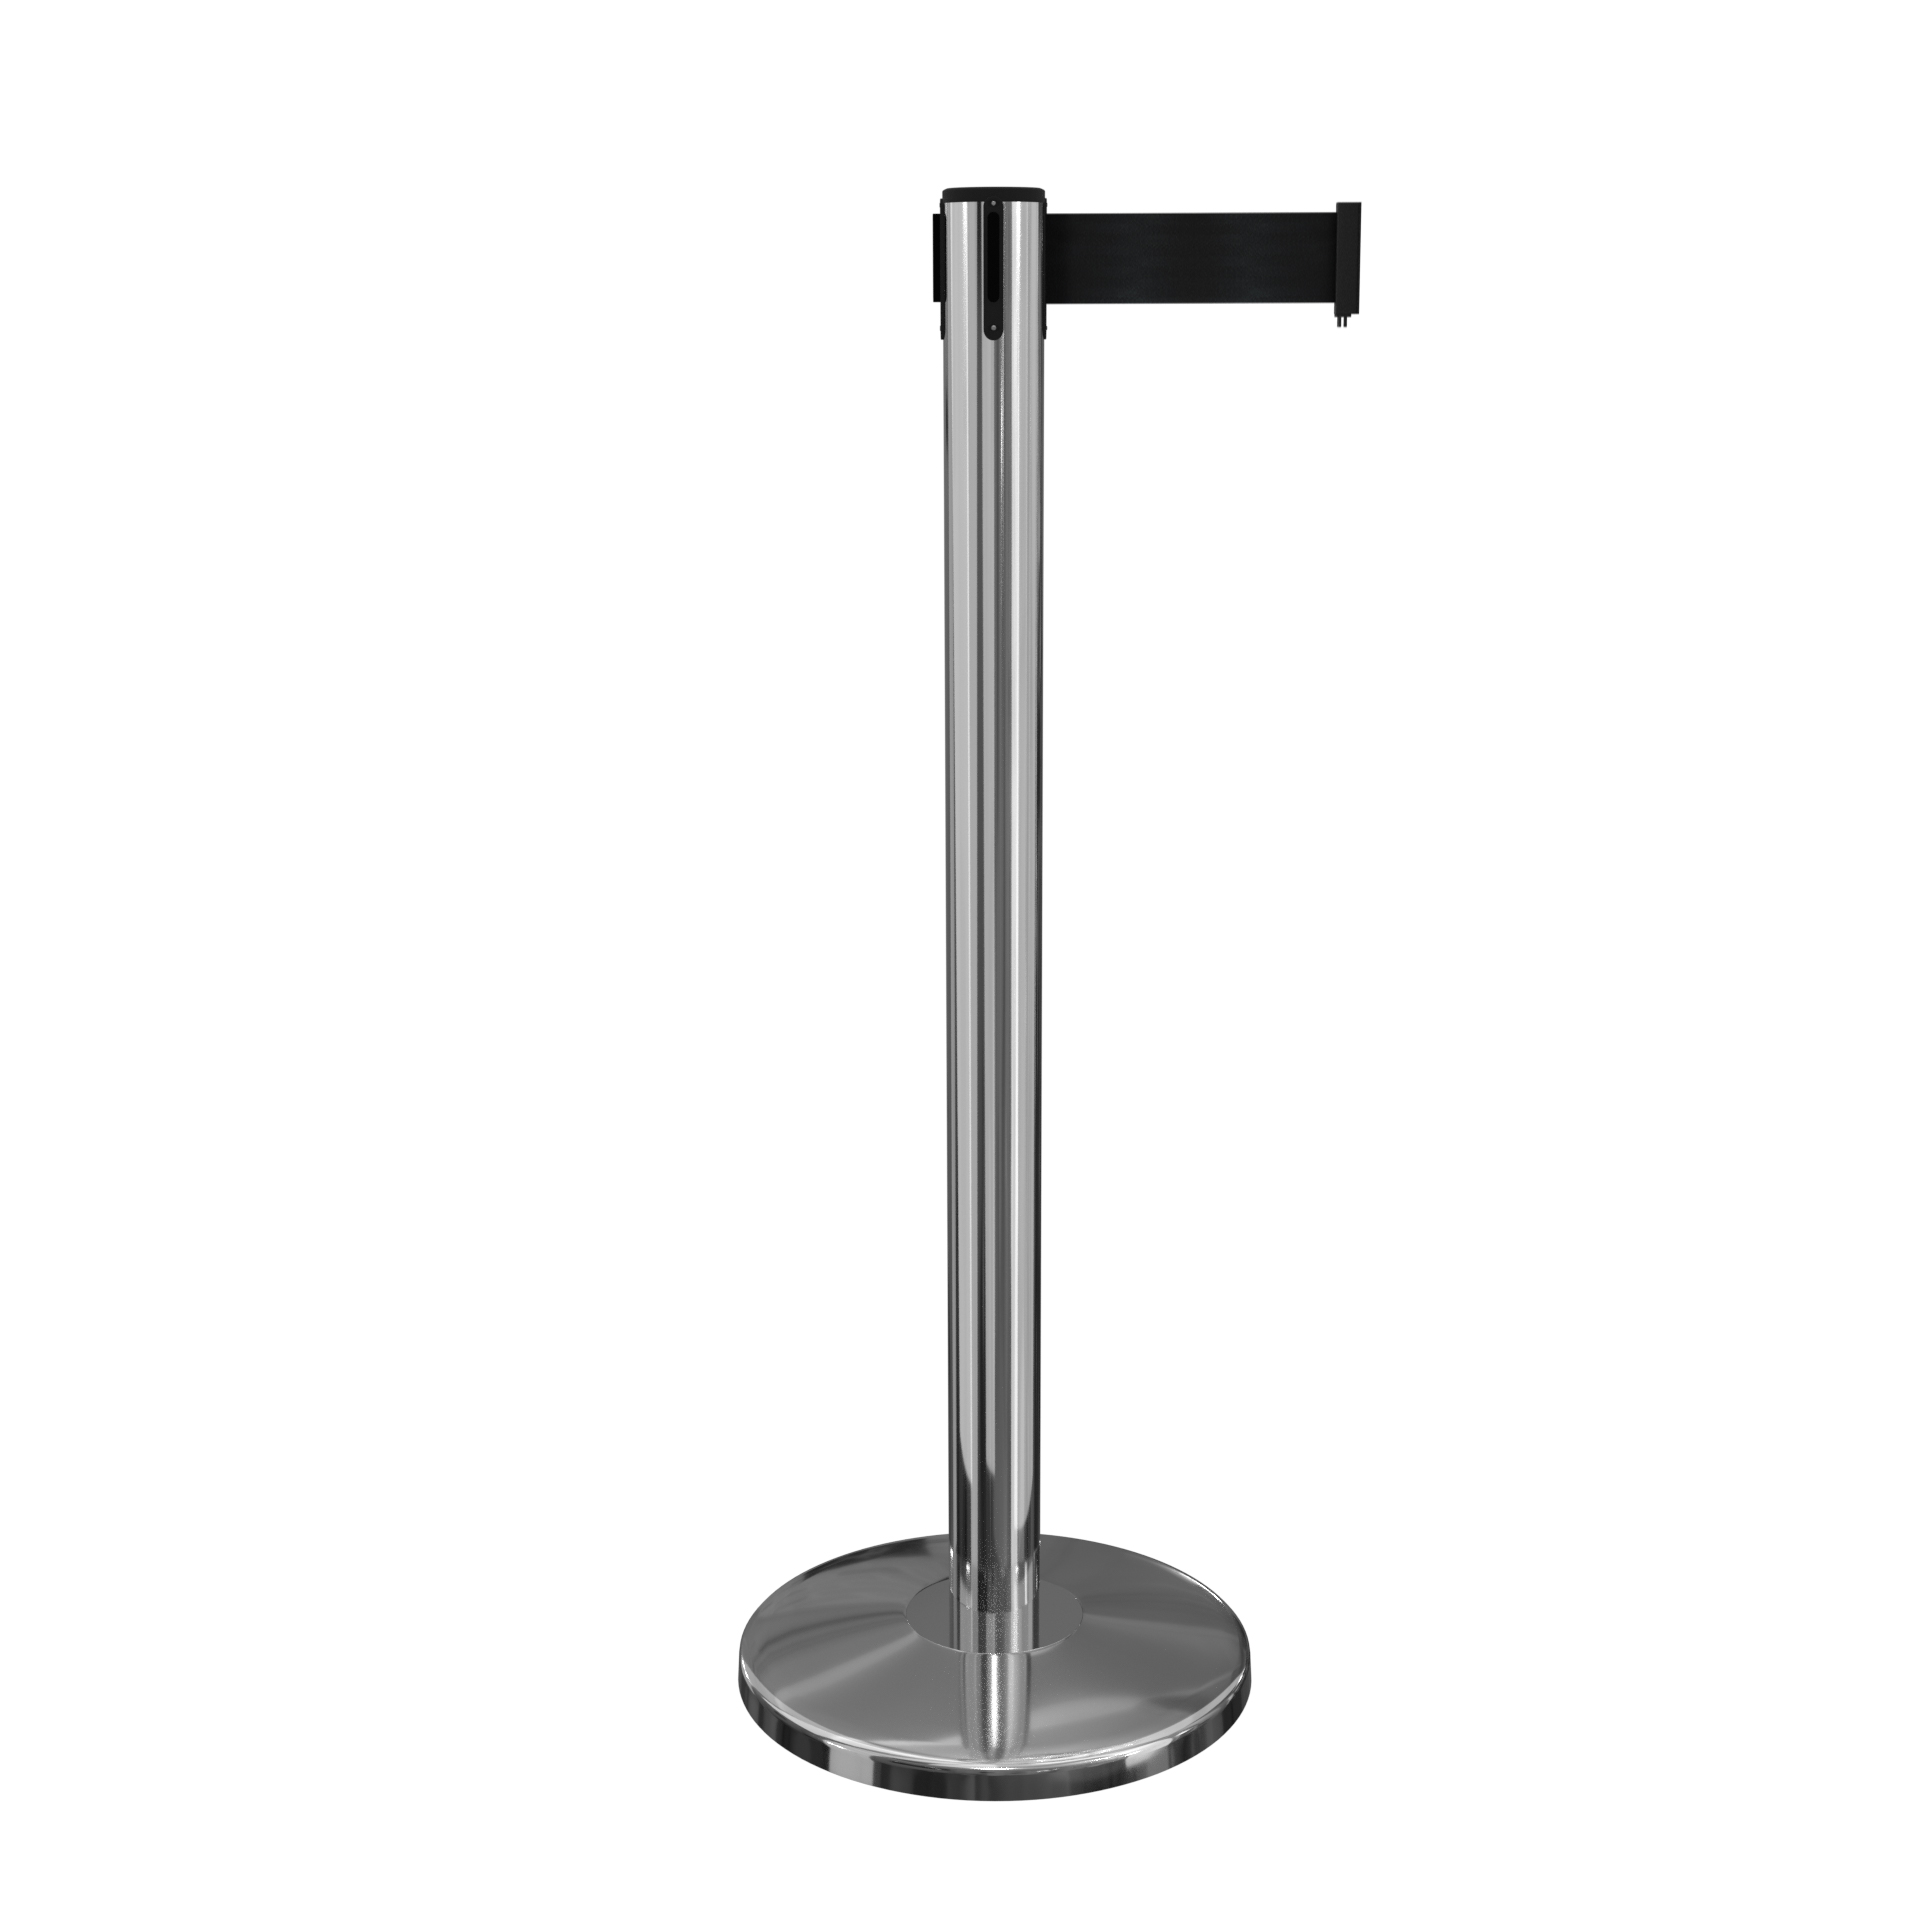 Polished Stainless Queuemaster 550 Retractable Belt Barrier